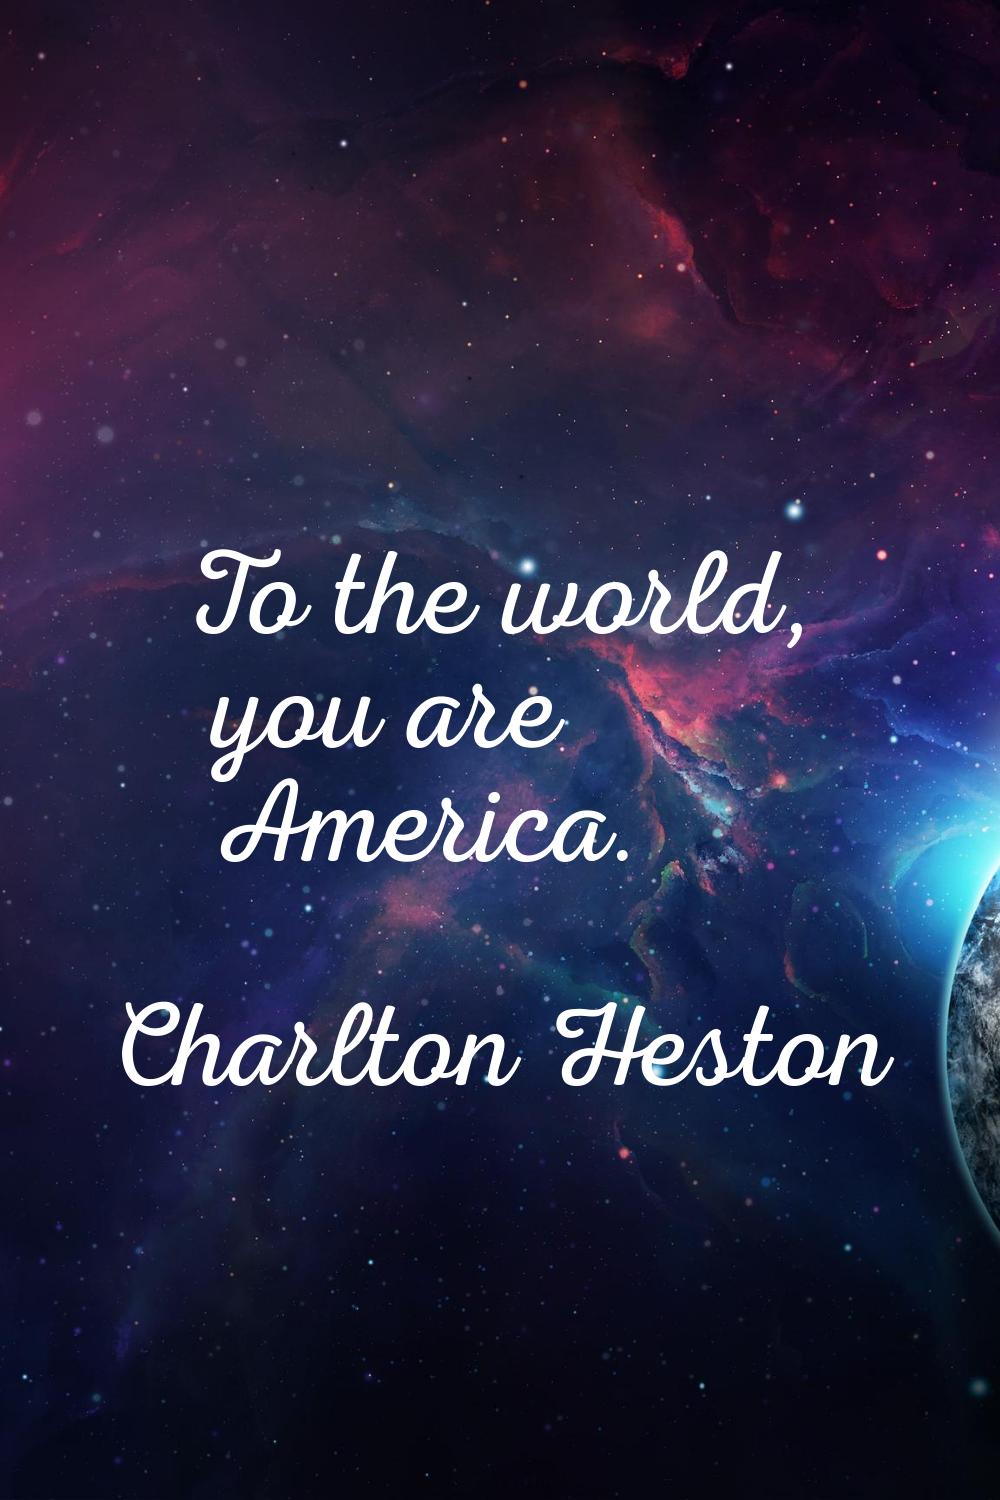 To the world, you are America.